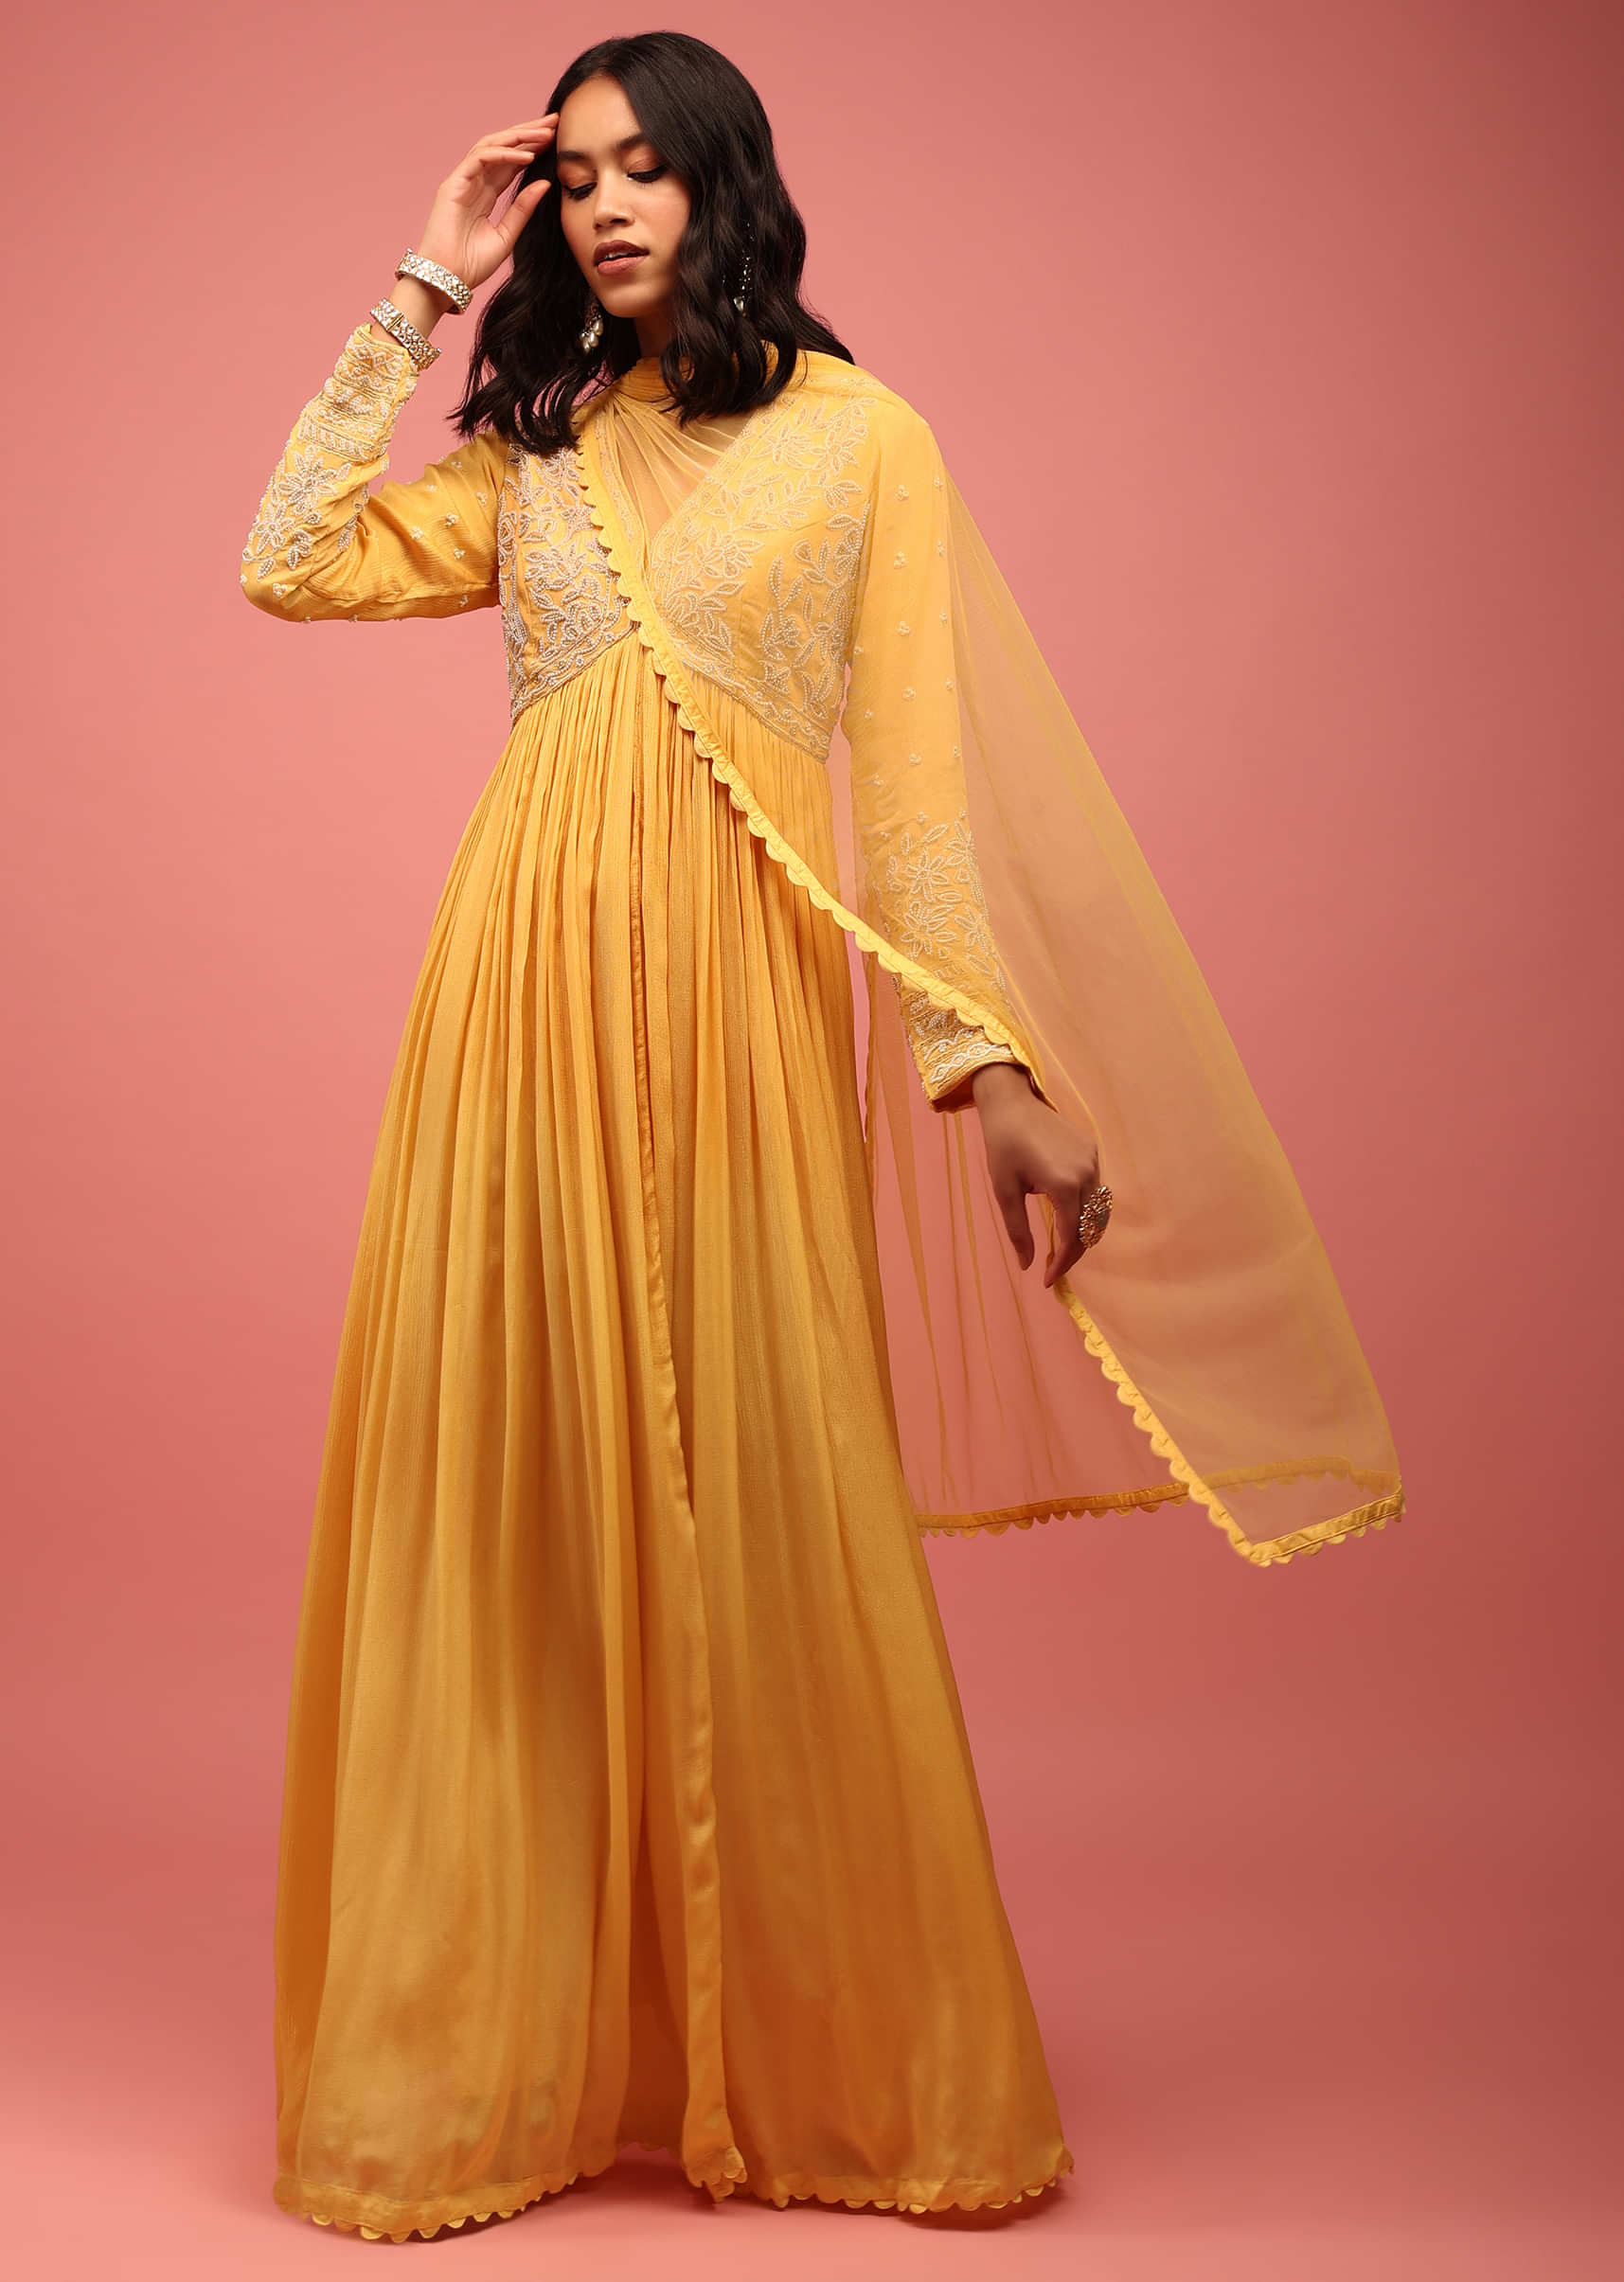 Yellow Anarkali Suit In Chiffon With Empire Style Heavily Embroidered Bodice In Moti Work